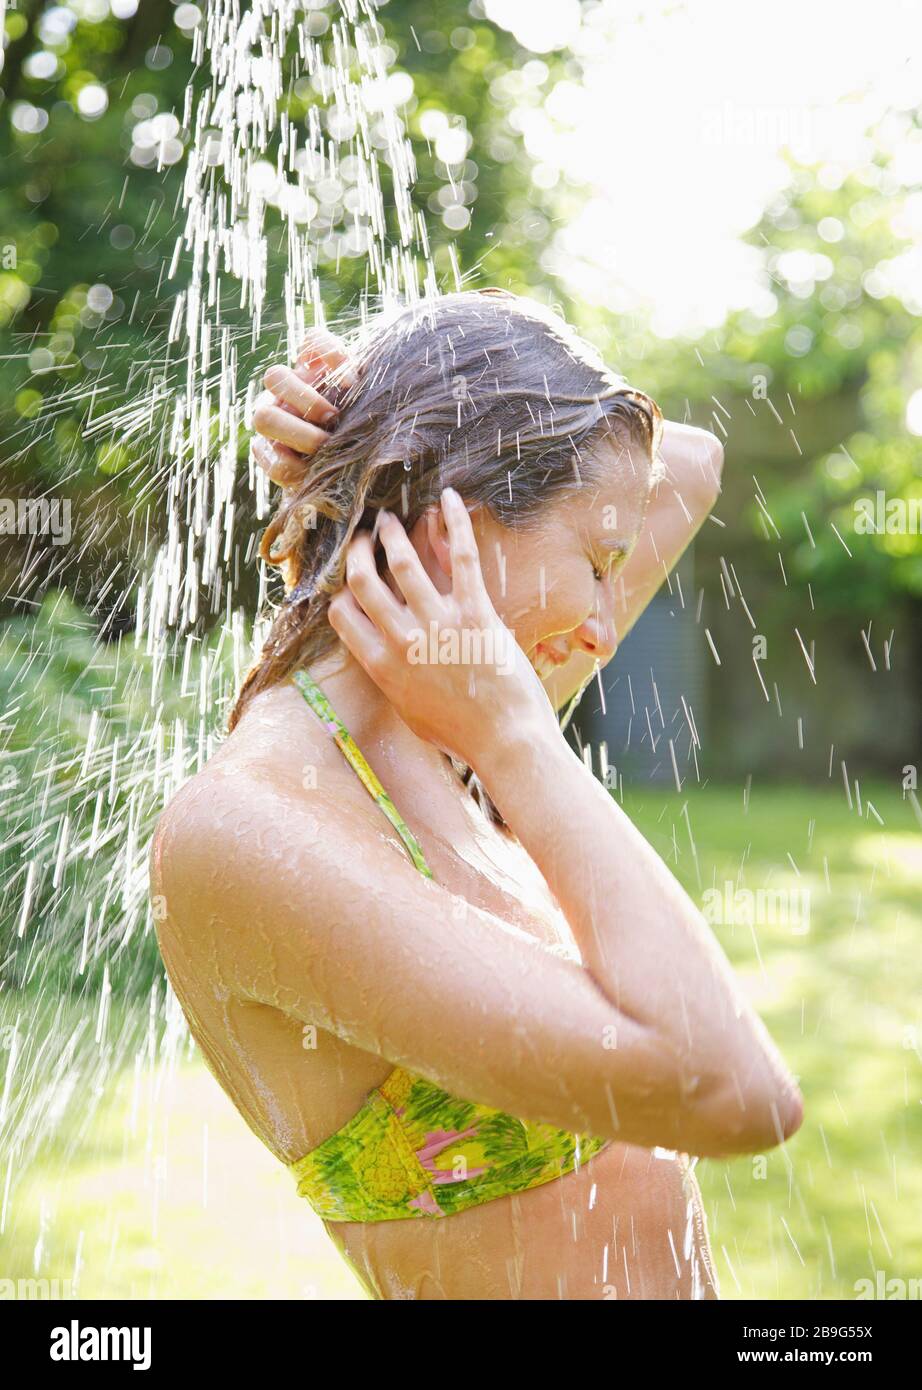 Young woman in bikini top standing under outdoor shower on summer patio Stock Photo